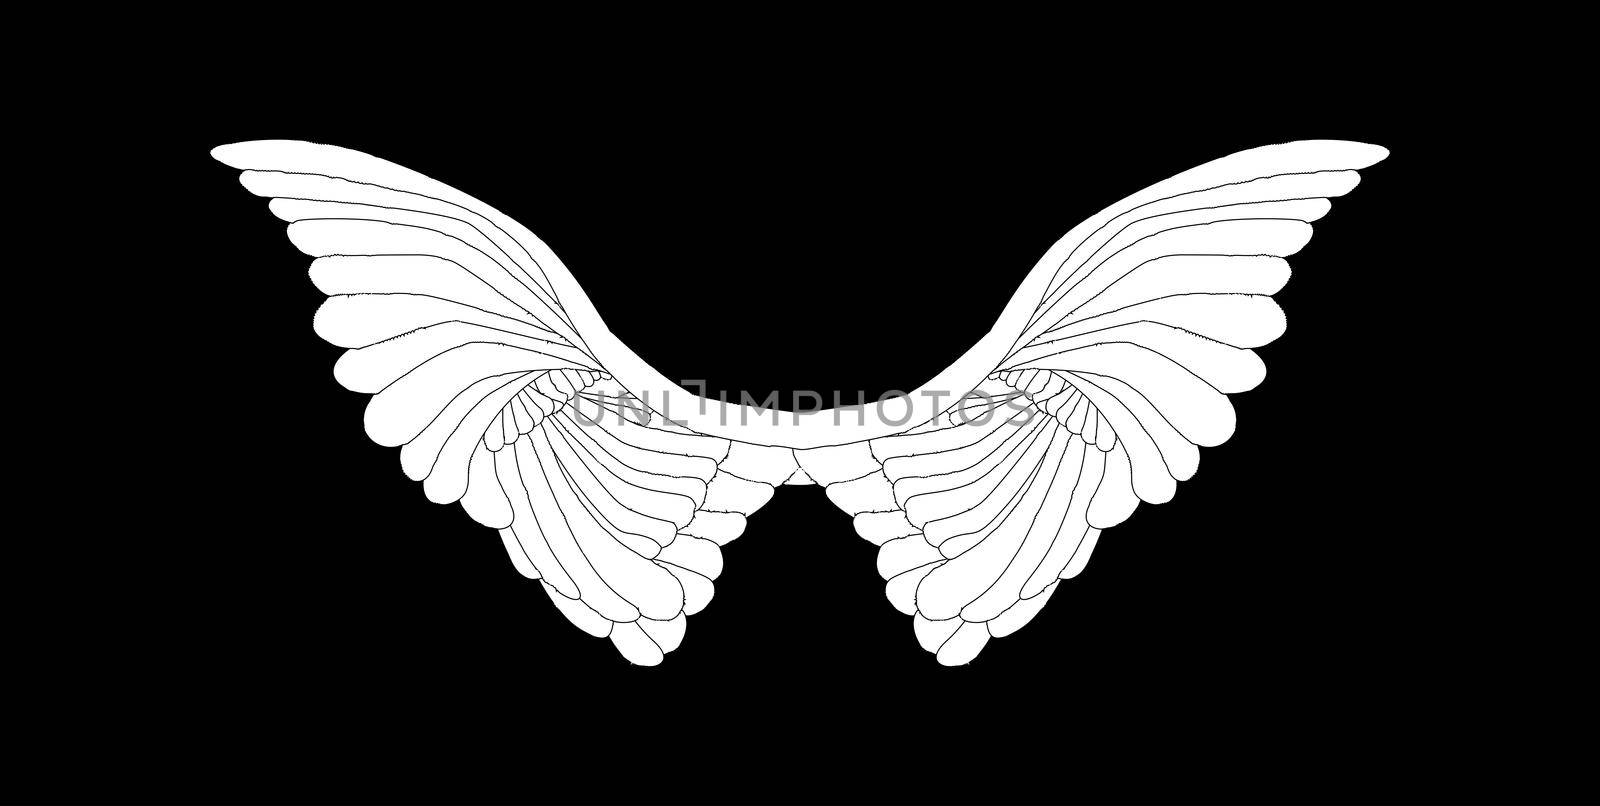 A large pair of white angelic wings spread over a black background